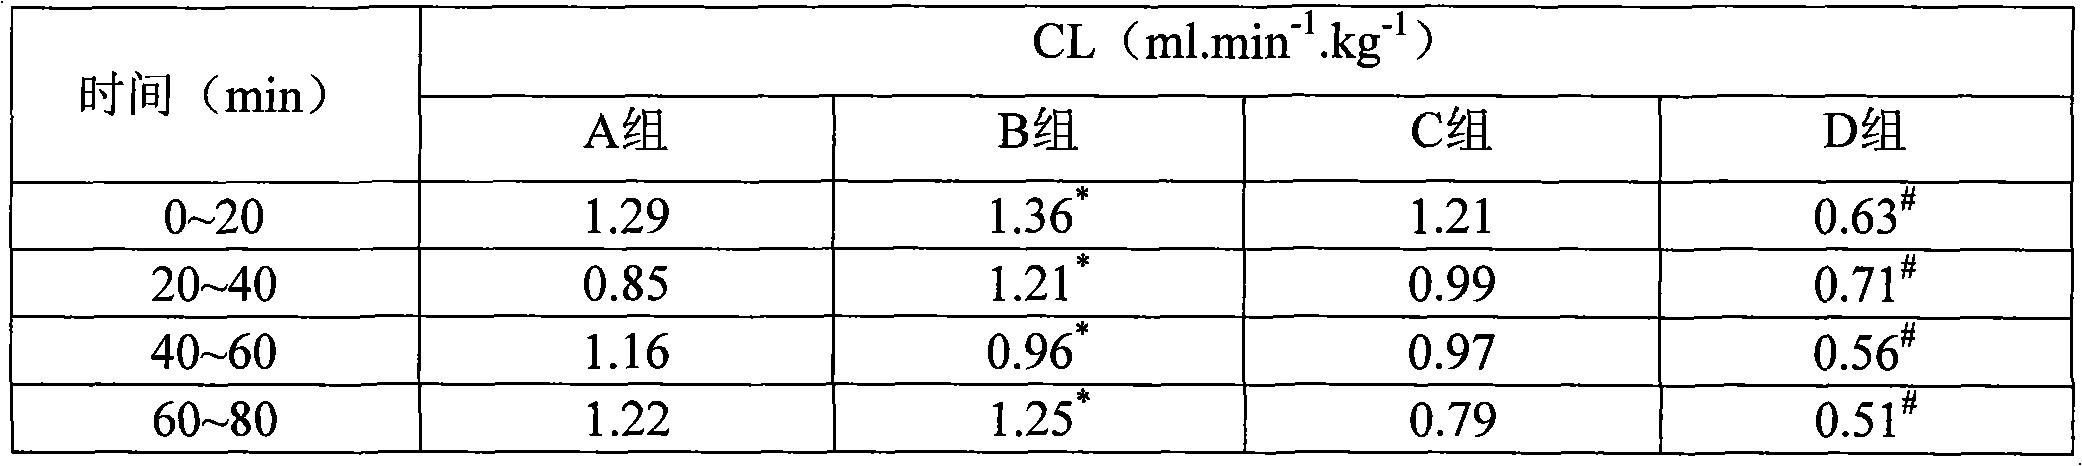 Anti-infective pharmaceutical composition containing cefminox